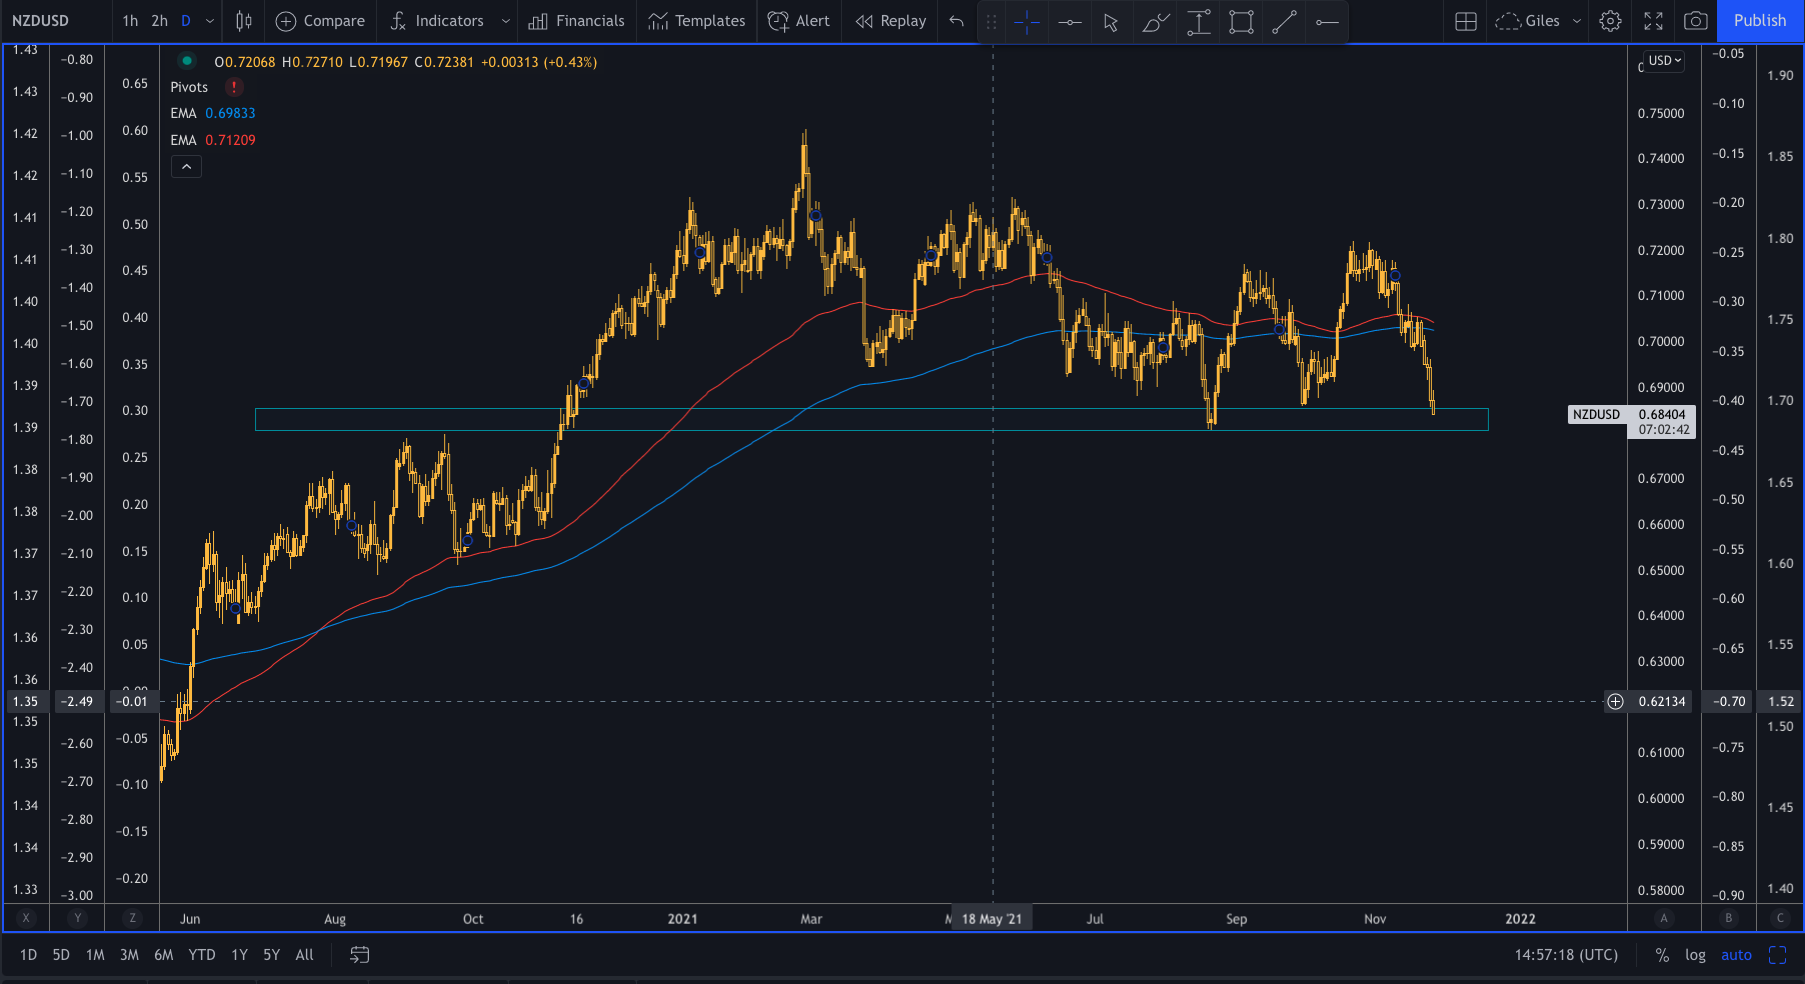 USD strength pressuring the pair for now